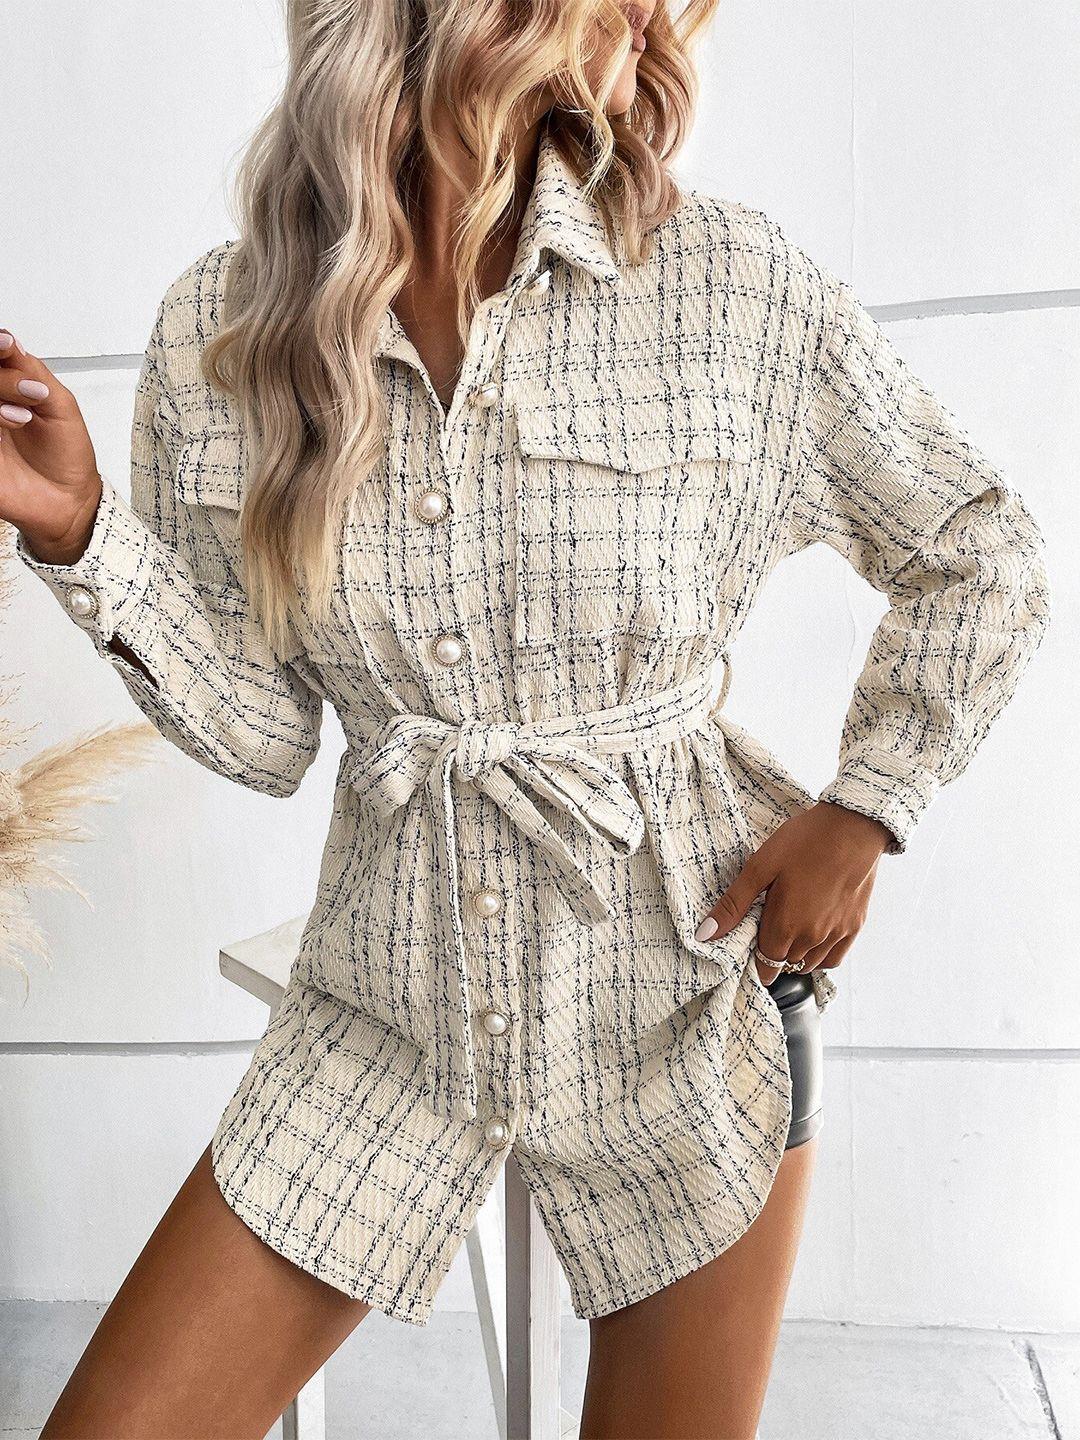 stylecast checked shirt style top